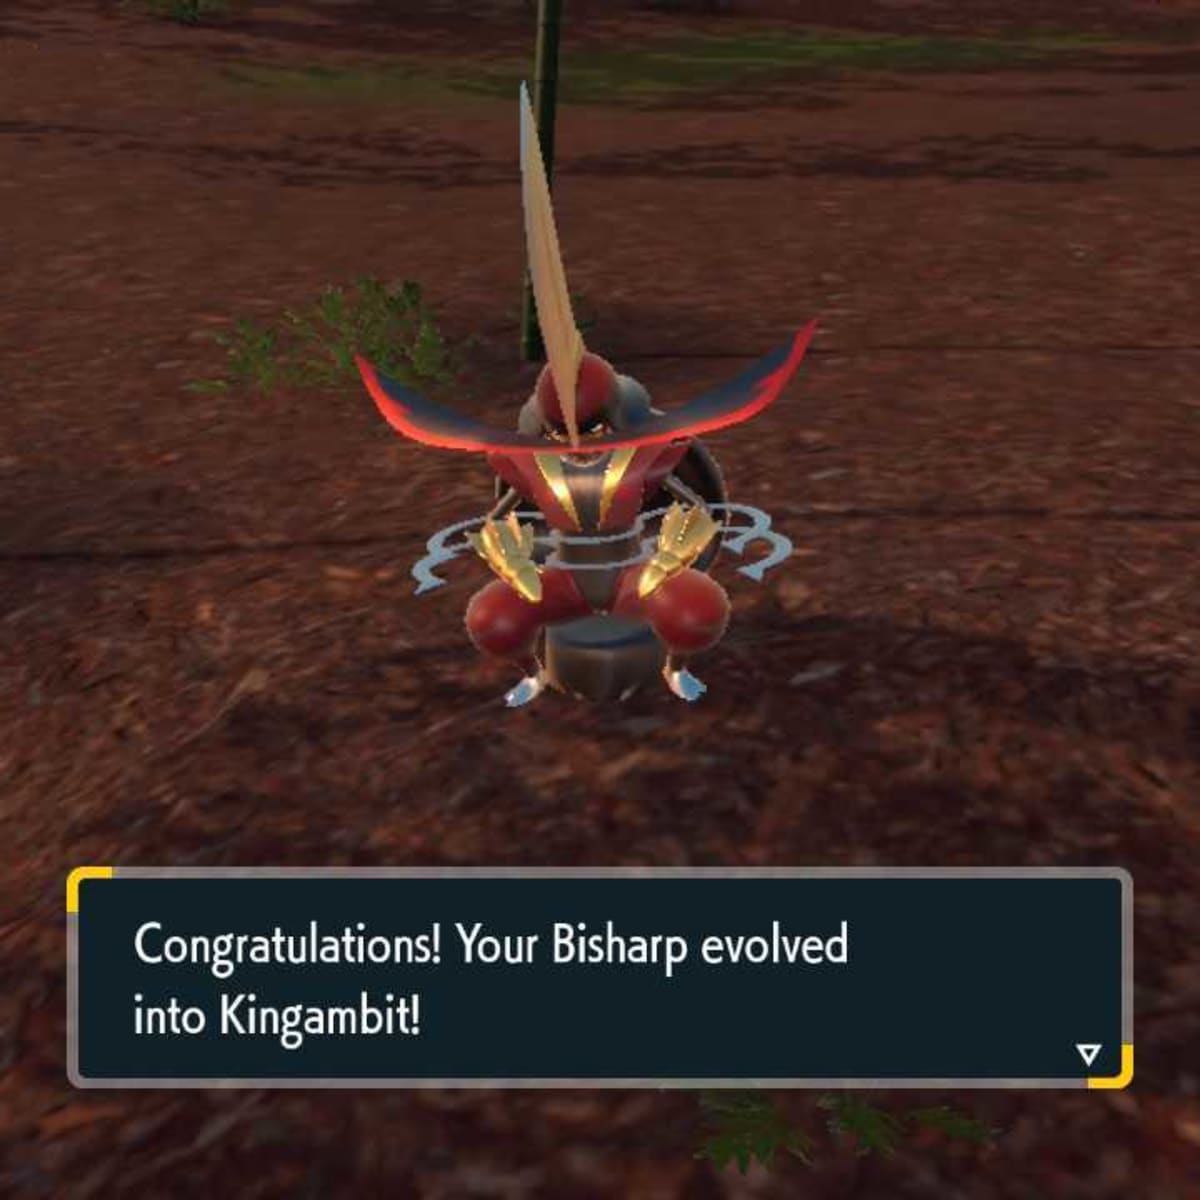 Kingambit is probably my favorite cross-gen evolution of all time